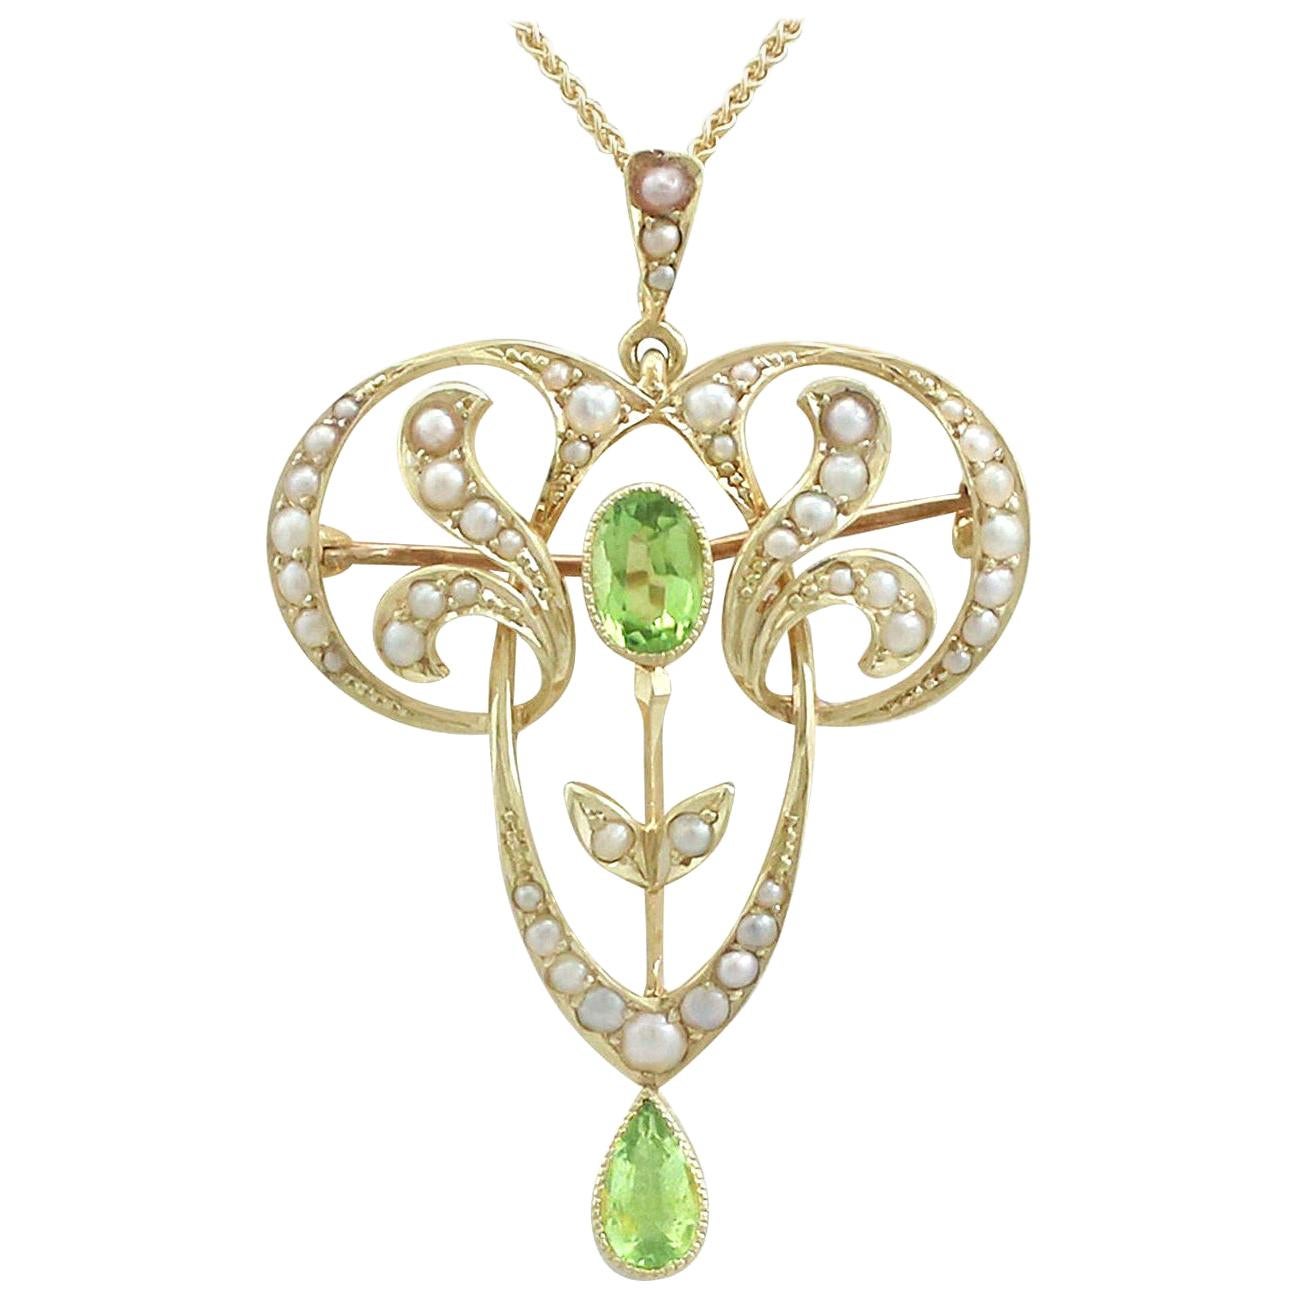 Antique 1910s Art Nouveau Peridot and Seed Pearl Yellow Gold Pendant / Brooch